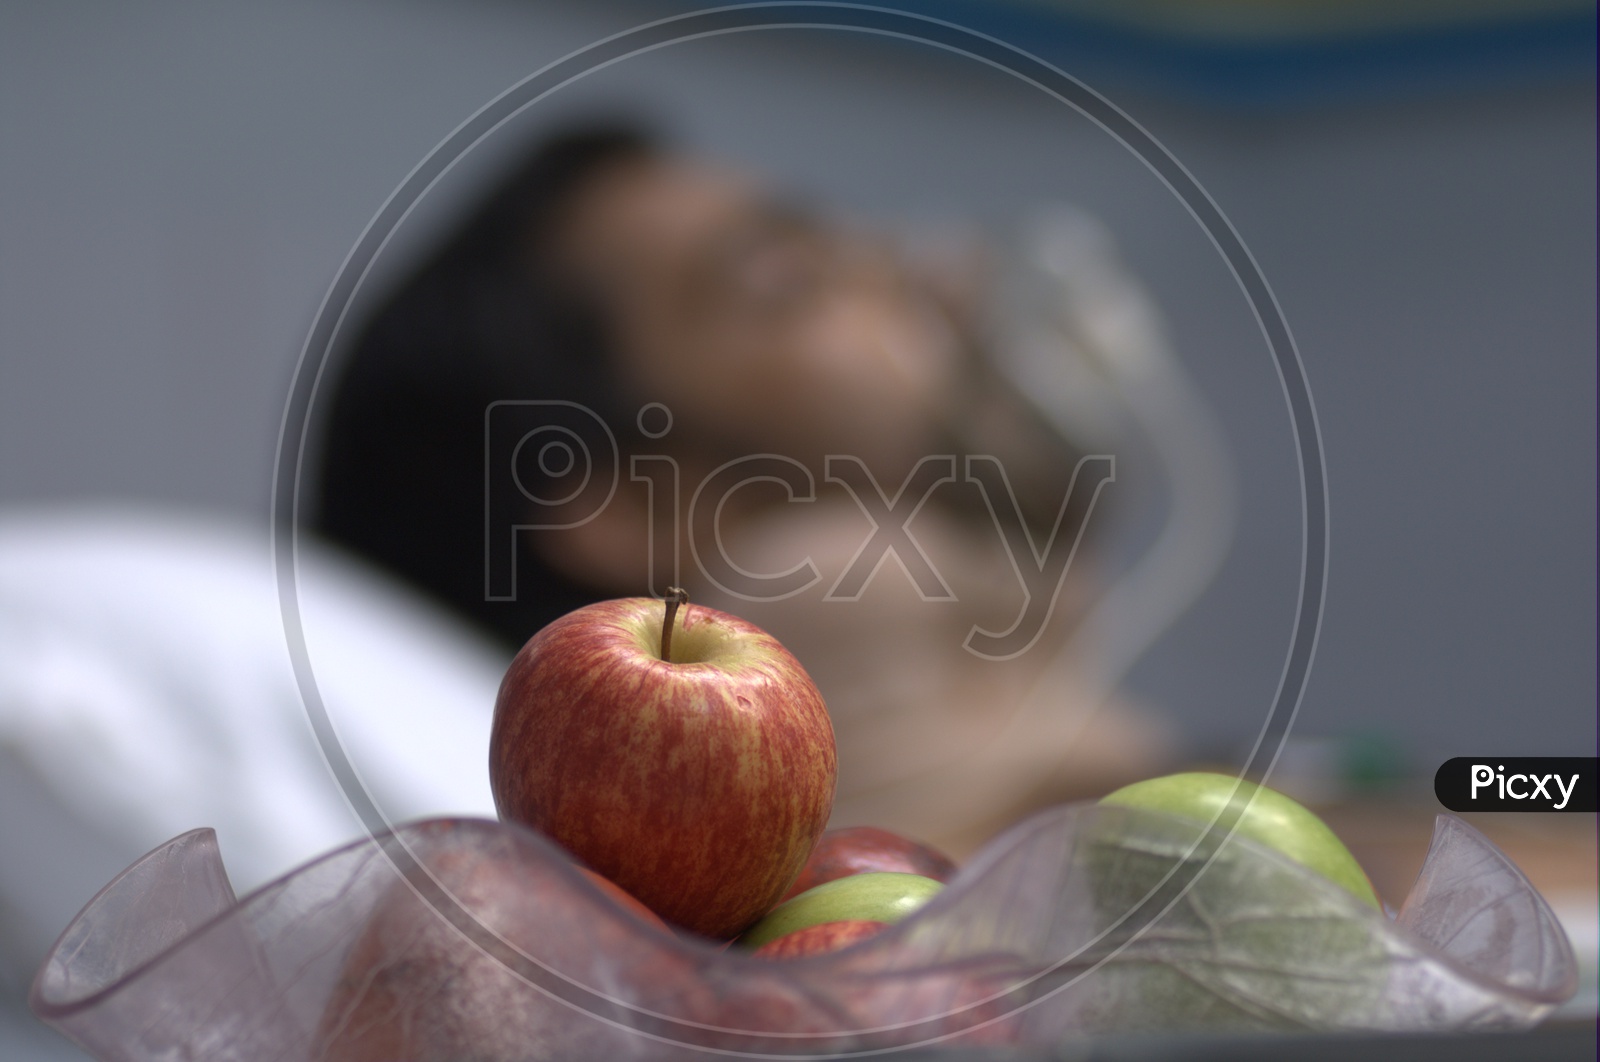 Close up shot of Apple fruit with man in the background